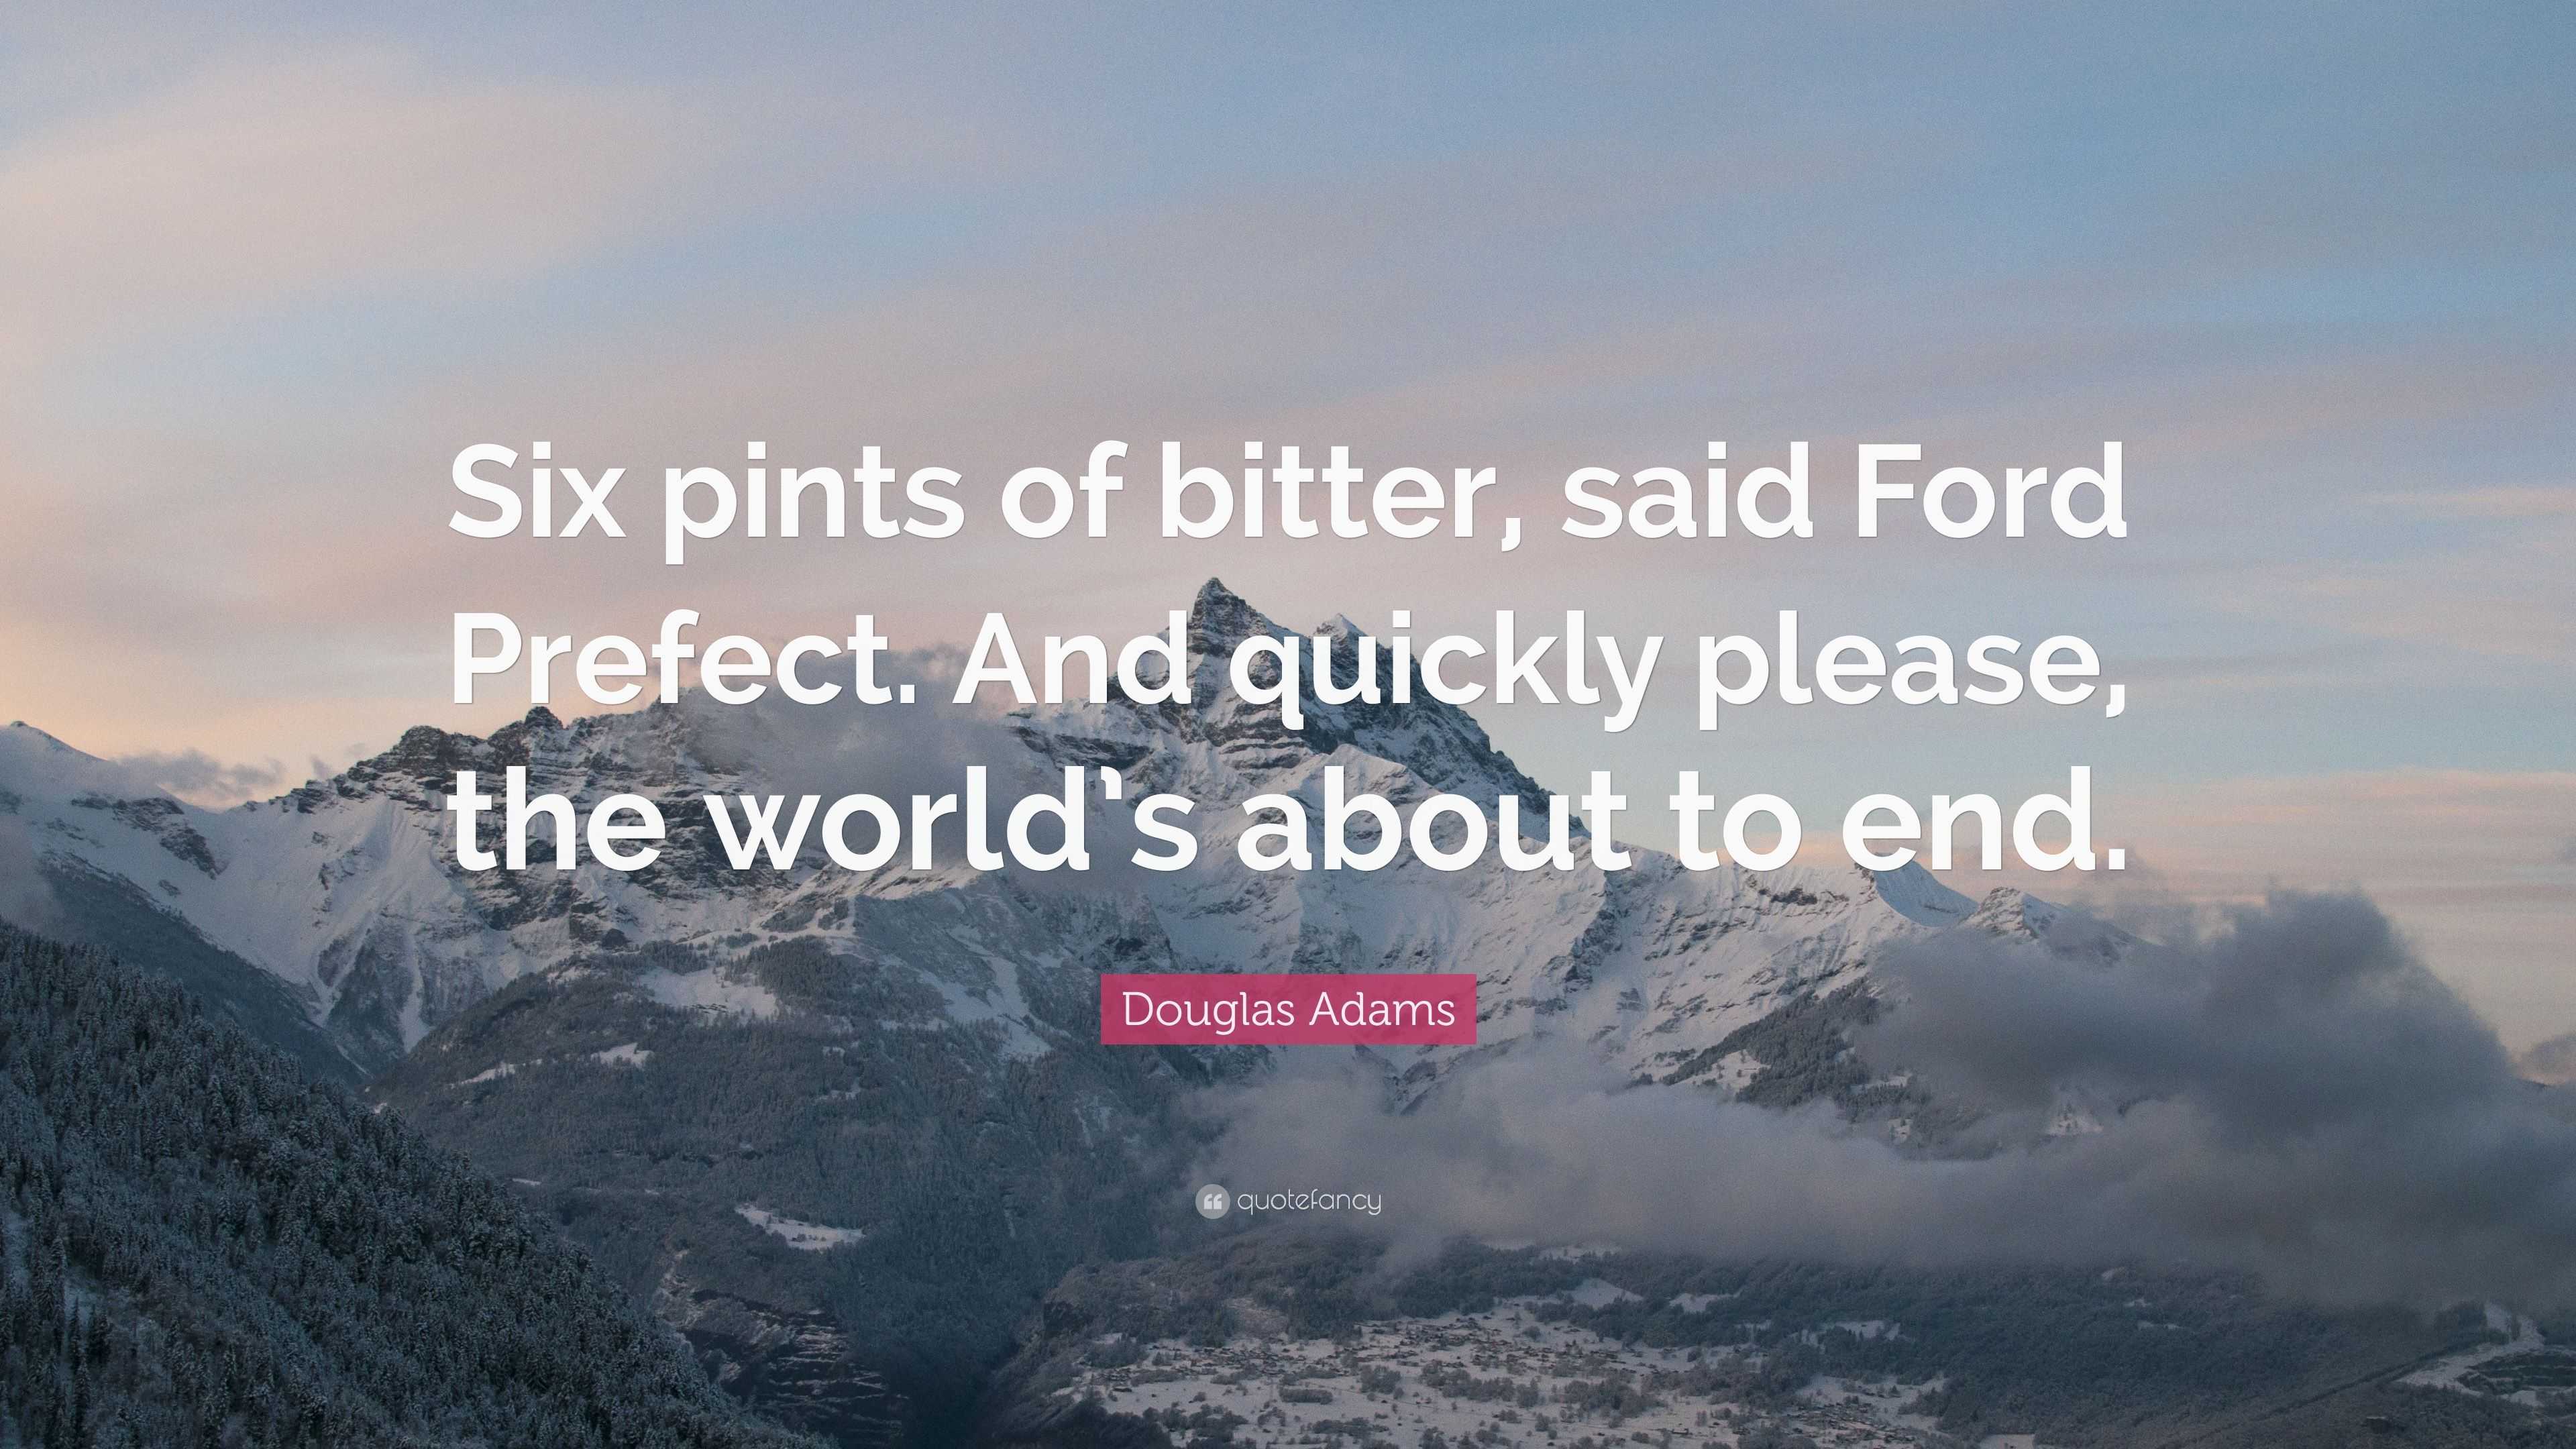 Douglas Adams Quote: “Six pints of bitter, said Ford Prefect. And